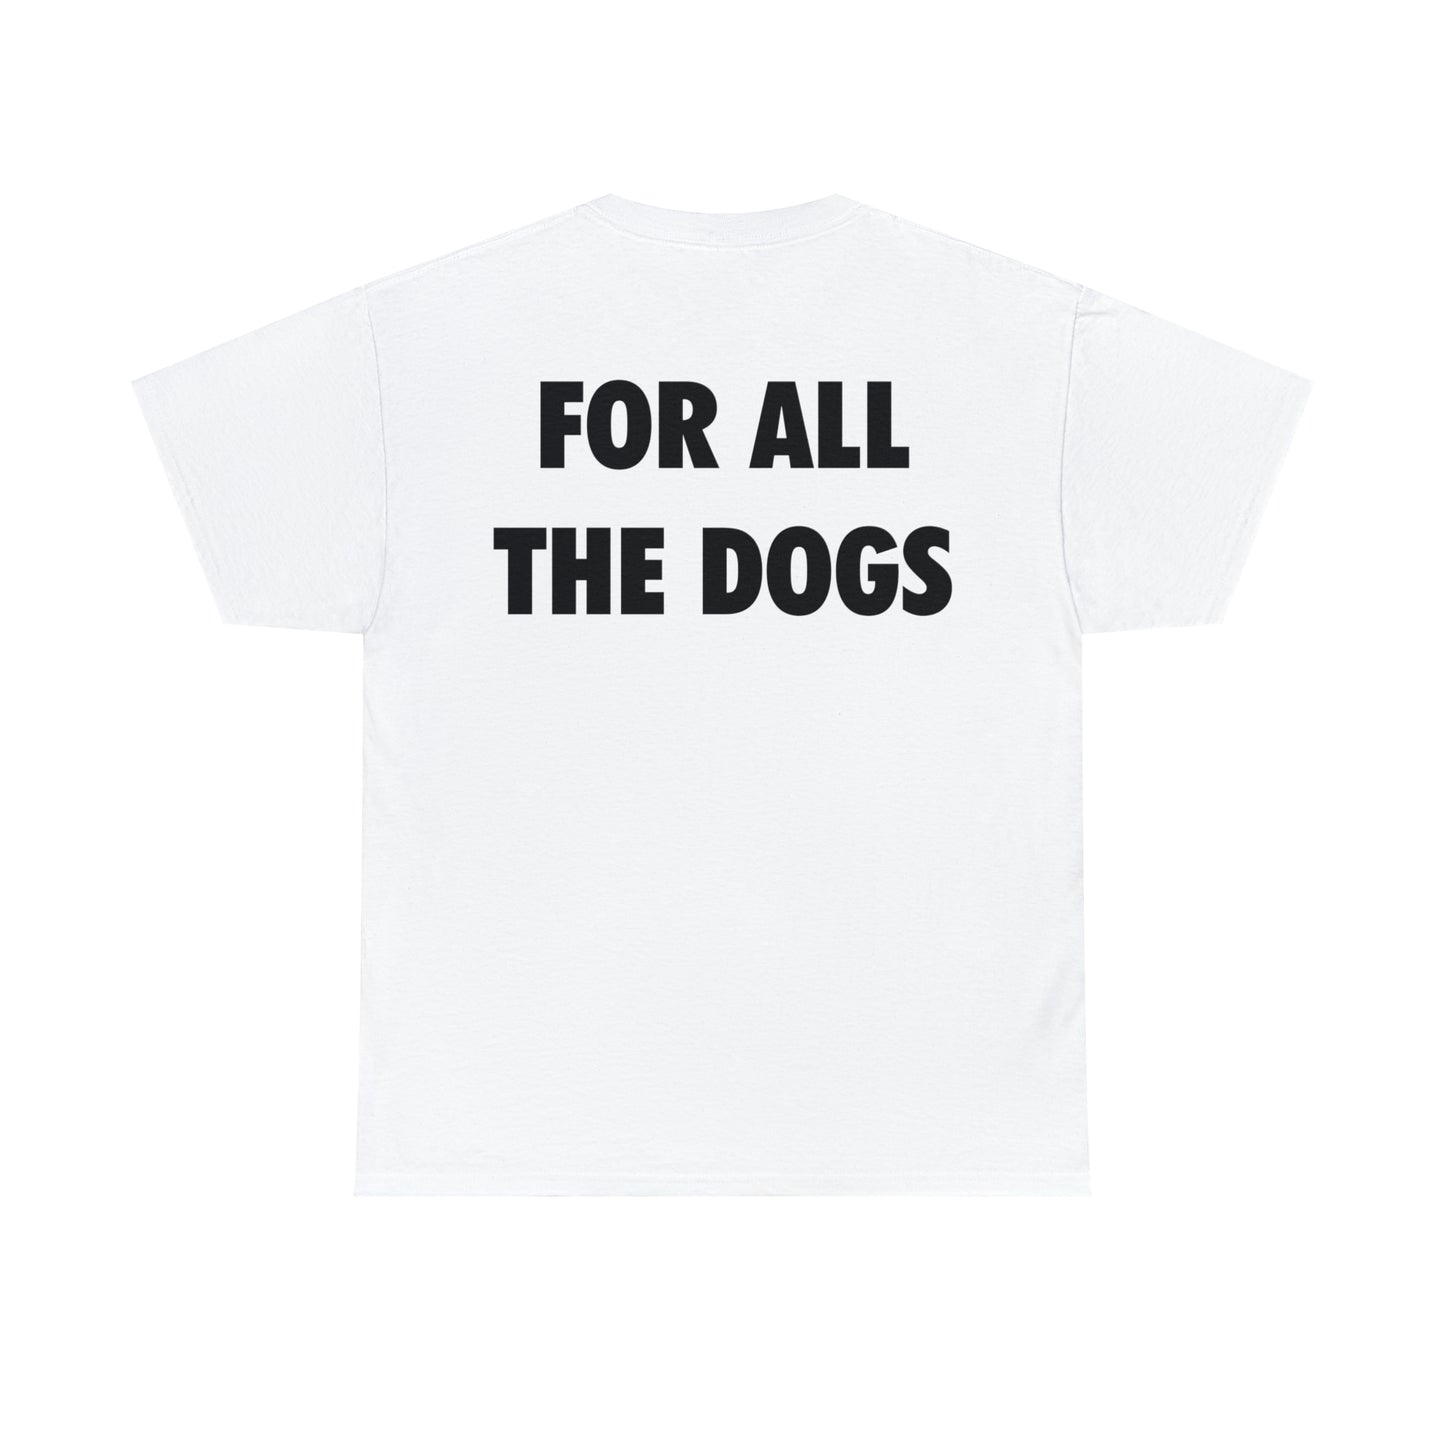 "for all the dogs" tee